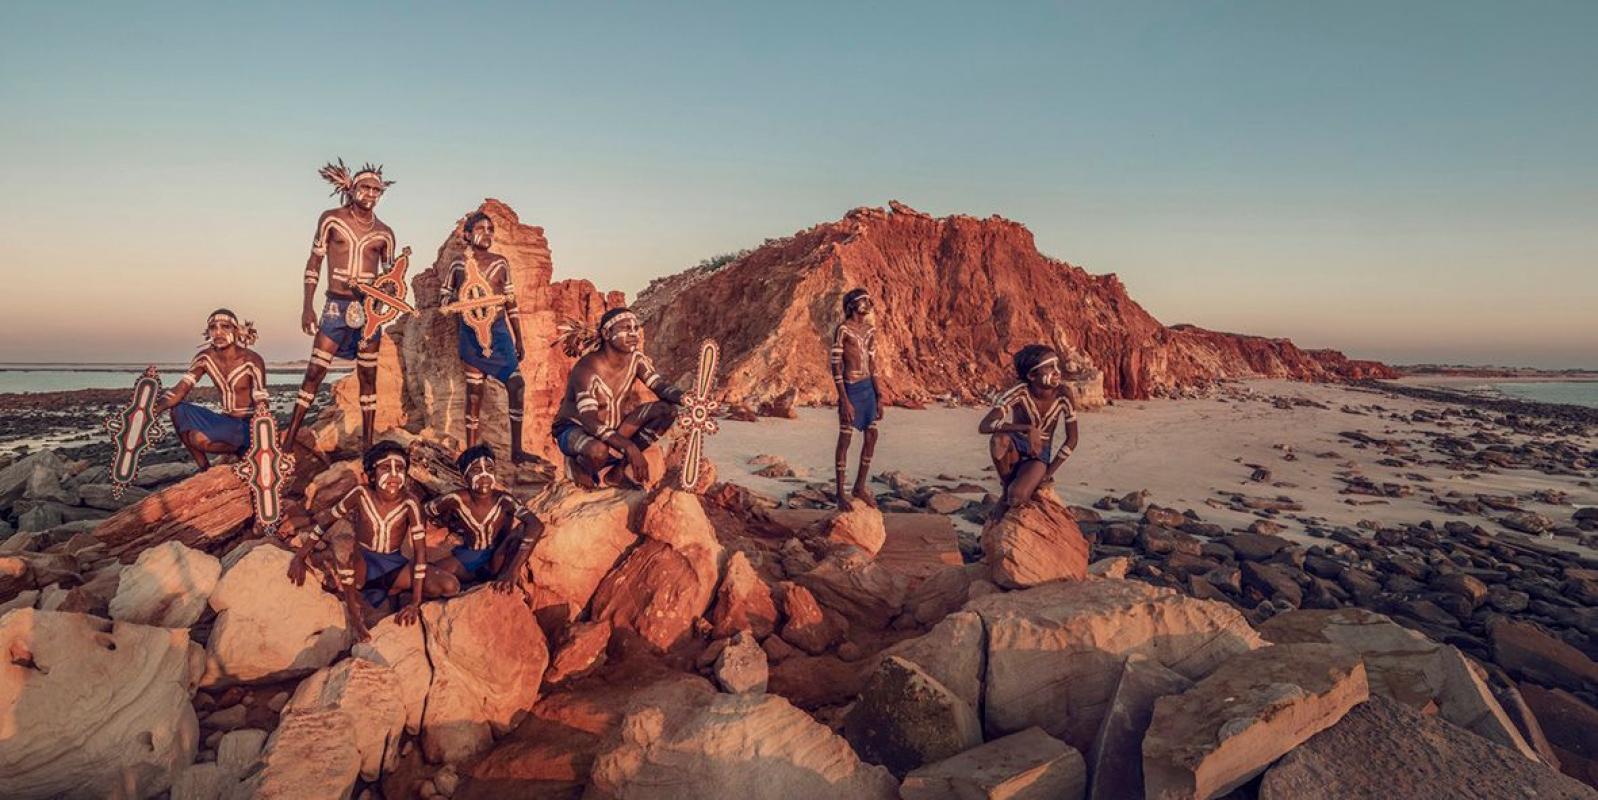 XLI 21 Bardi  Cape Leveque, Dampier Peninsula, The Kimberley  Australia 2018

A part of the Bardi (or Baada) community lives mainly north of the city of Broome on the uppermost point of the Dampier Peninsula. 

They live in harmony with the nearby